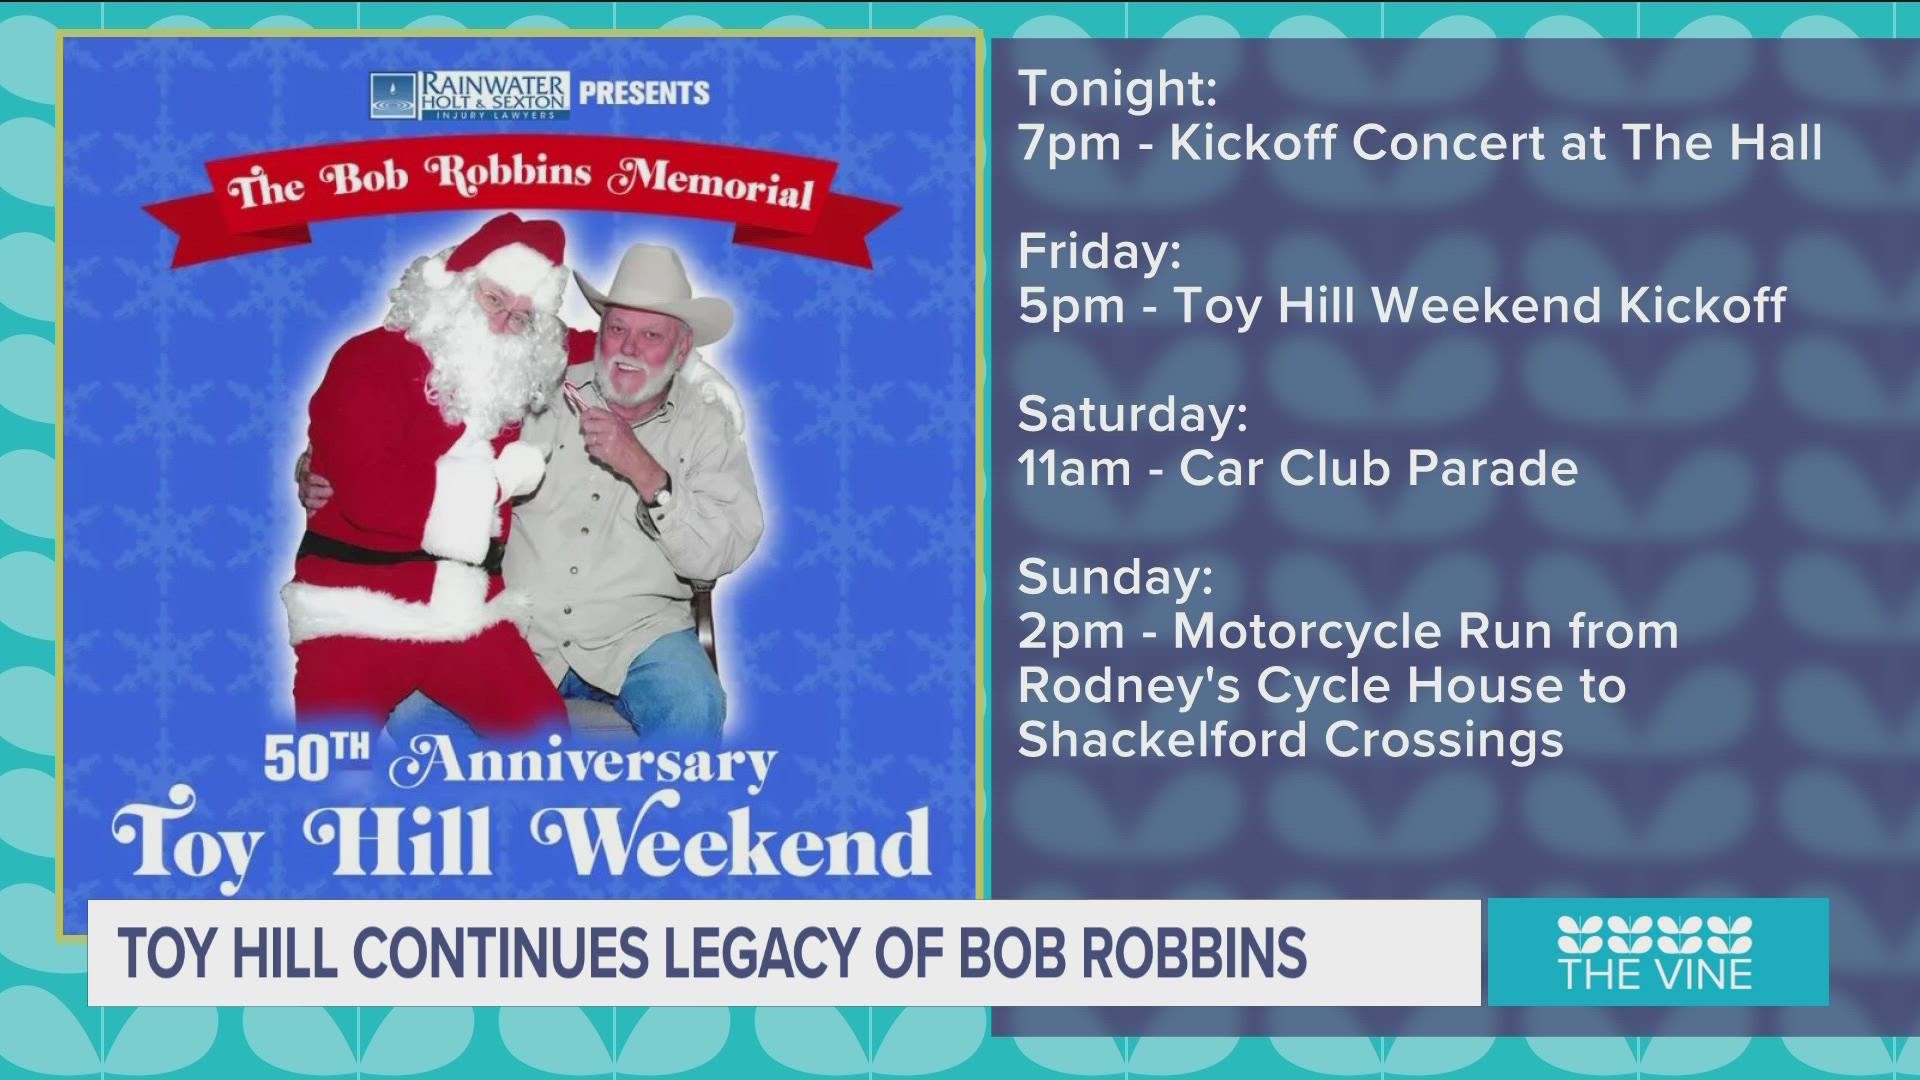 This would've been Bob's 50th year involved with "Toy Hill." He was famous for his mission to make sure every child in Arkansas received a toy for Christmas.